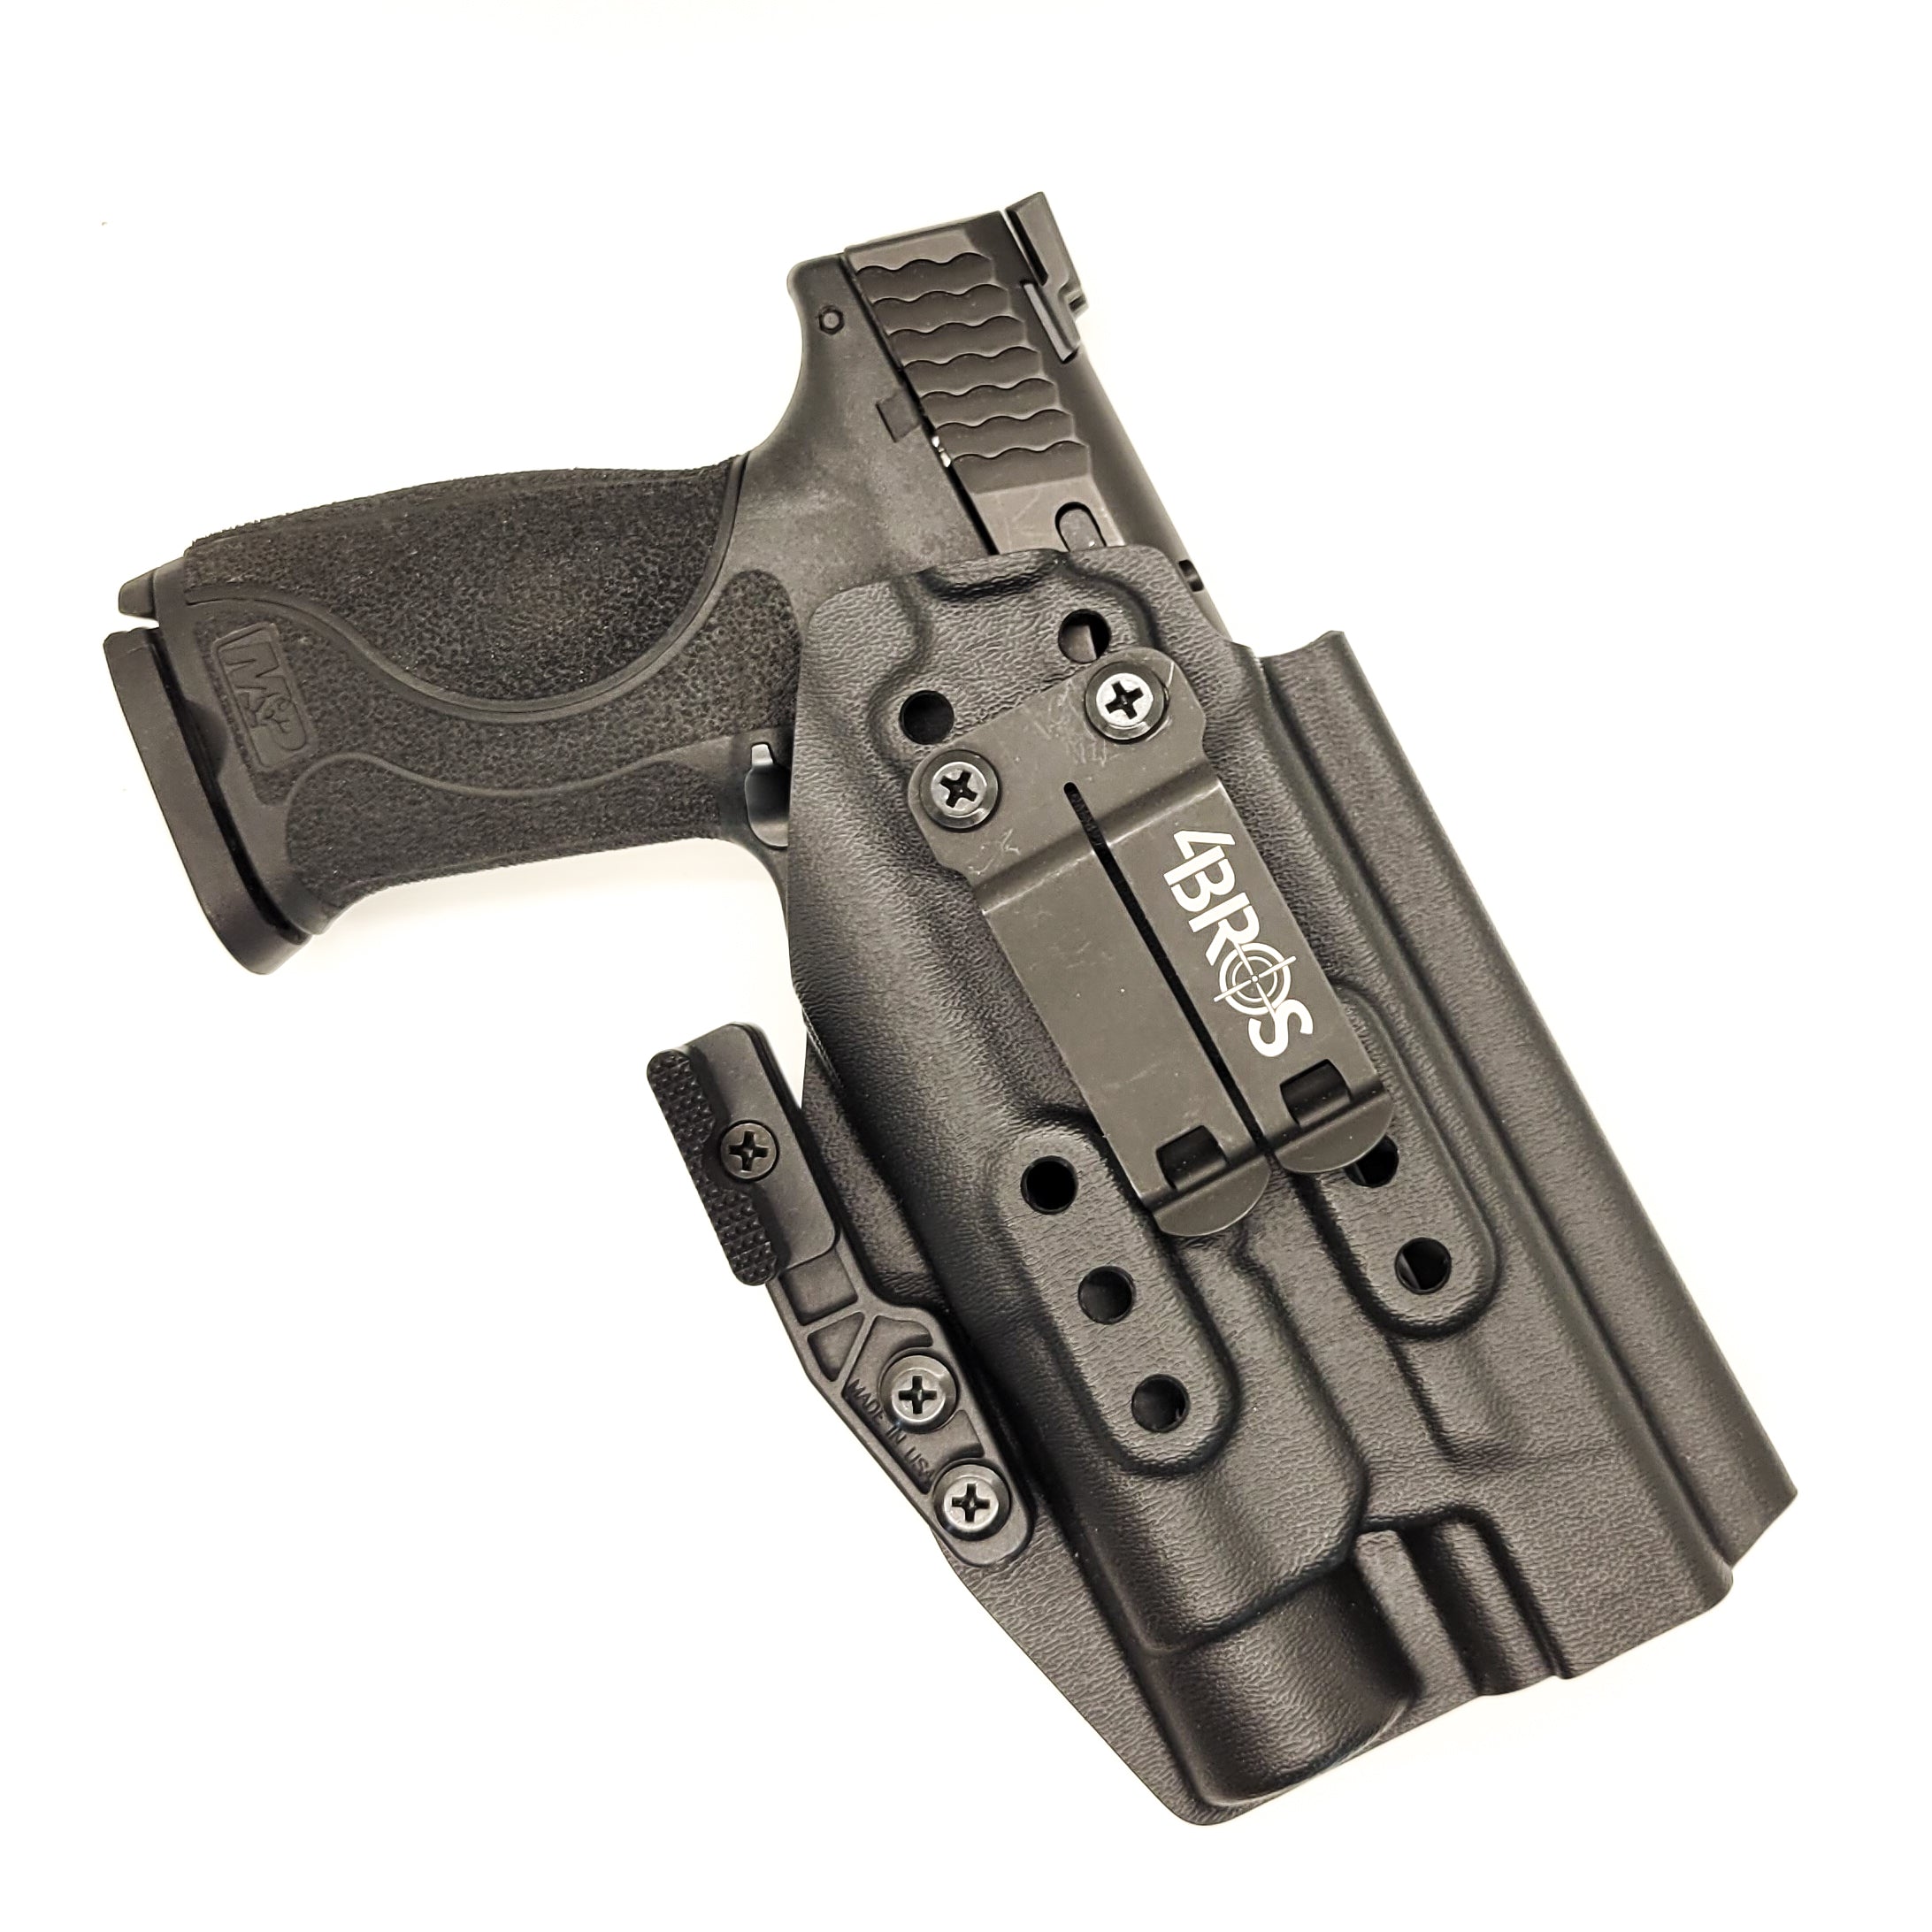 Inside Waistband Kydex Taco Style Holster designed to fit the Smith and Wesson M&P 10MM M2.0 pistol with thumb safety and Streamlight TLR-1 or TLR-1 HL. The holster is designed to fit both the 4" and 4.6" barrel lengths.  Full sweat guard, adjustable retention, profiled for a red dot sight. Proudly made in the USA.